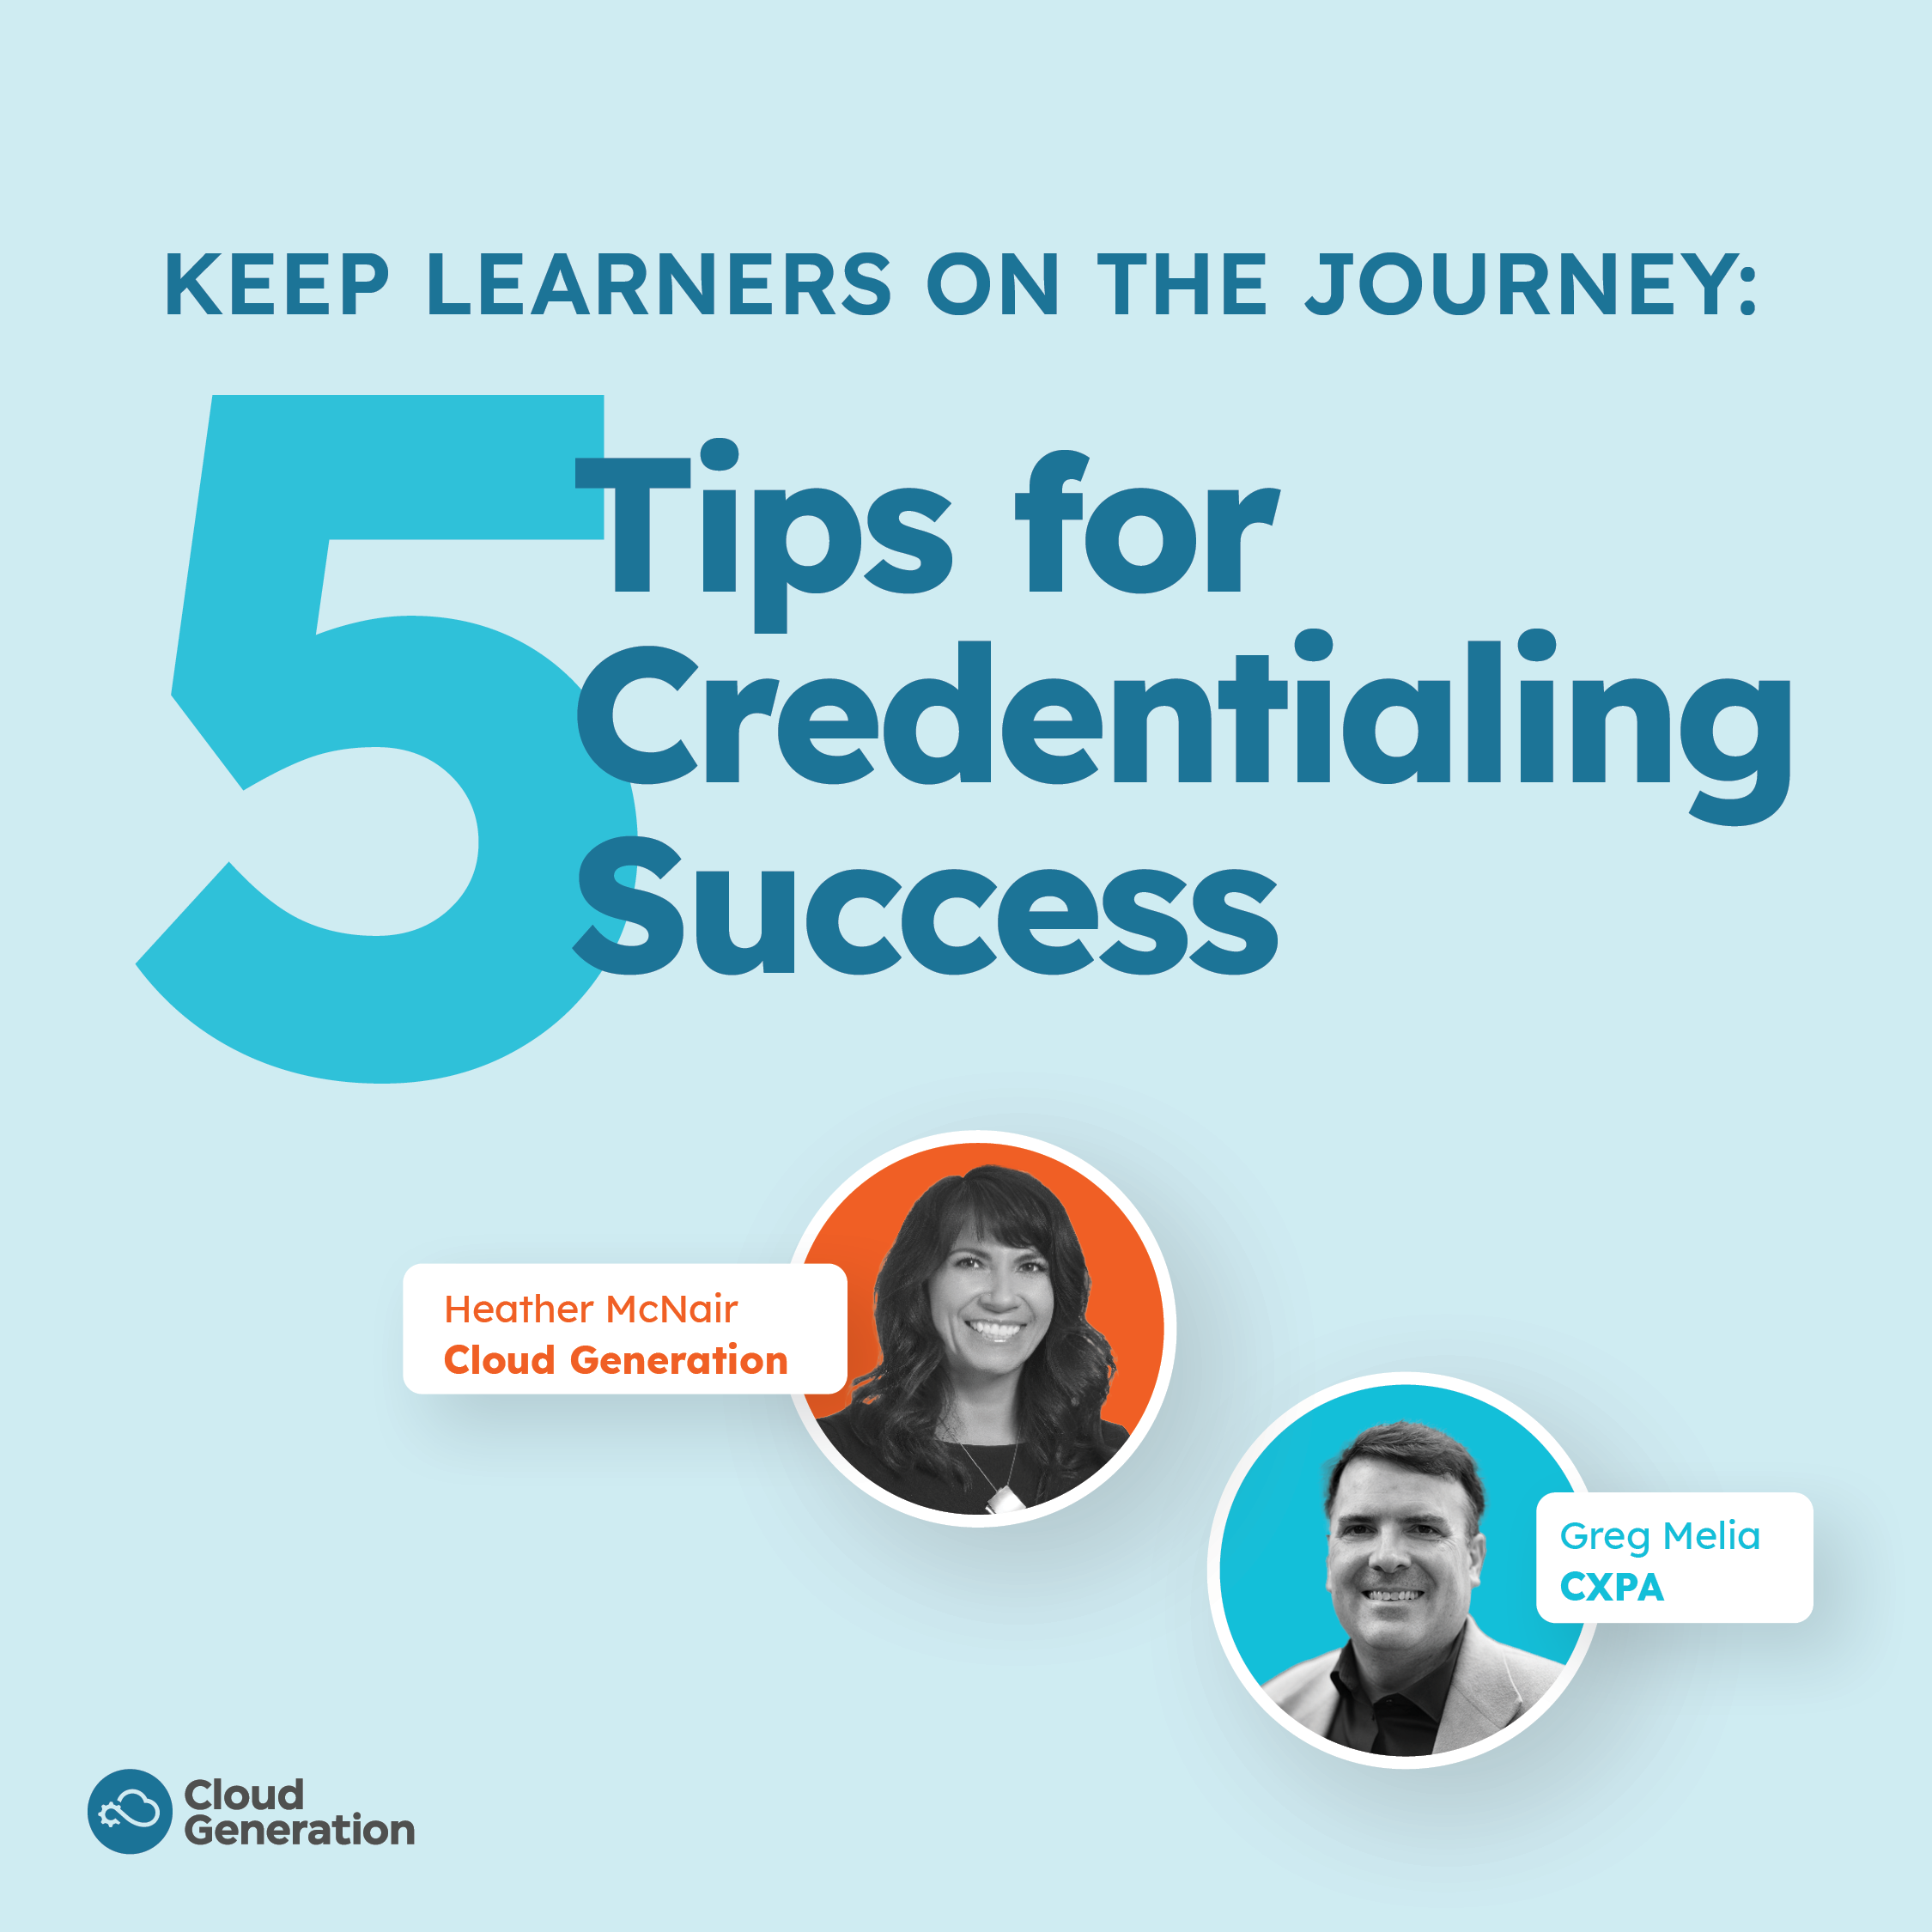 Five tips for credentialing success